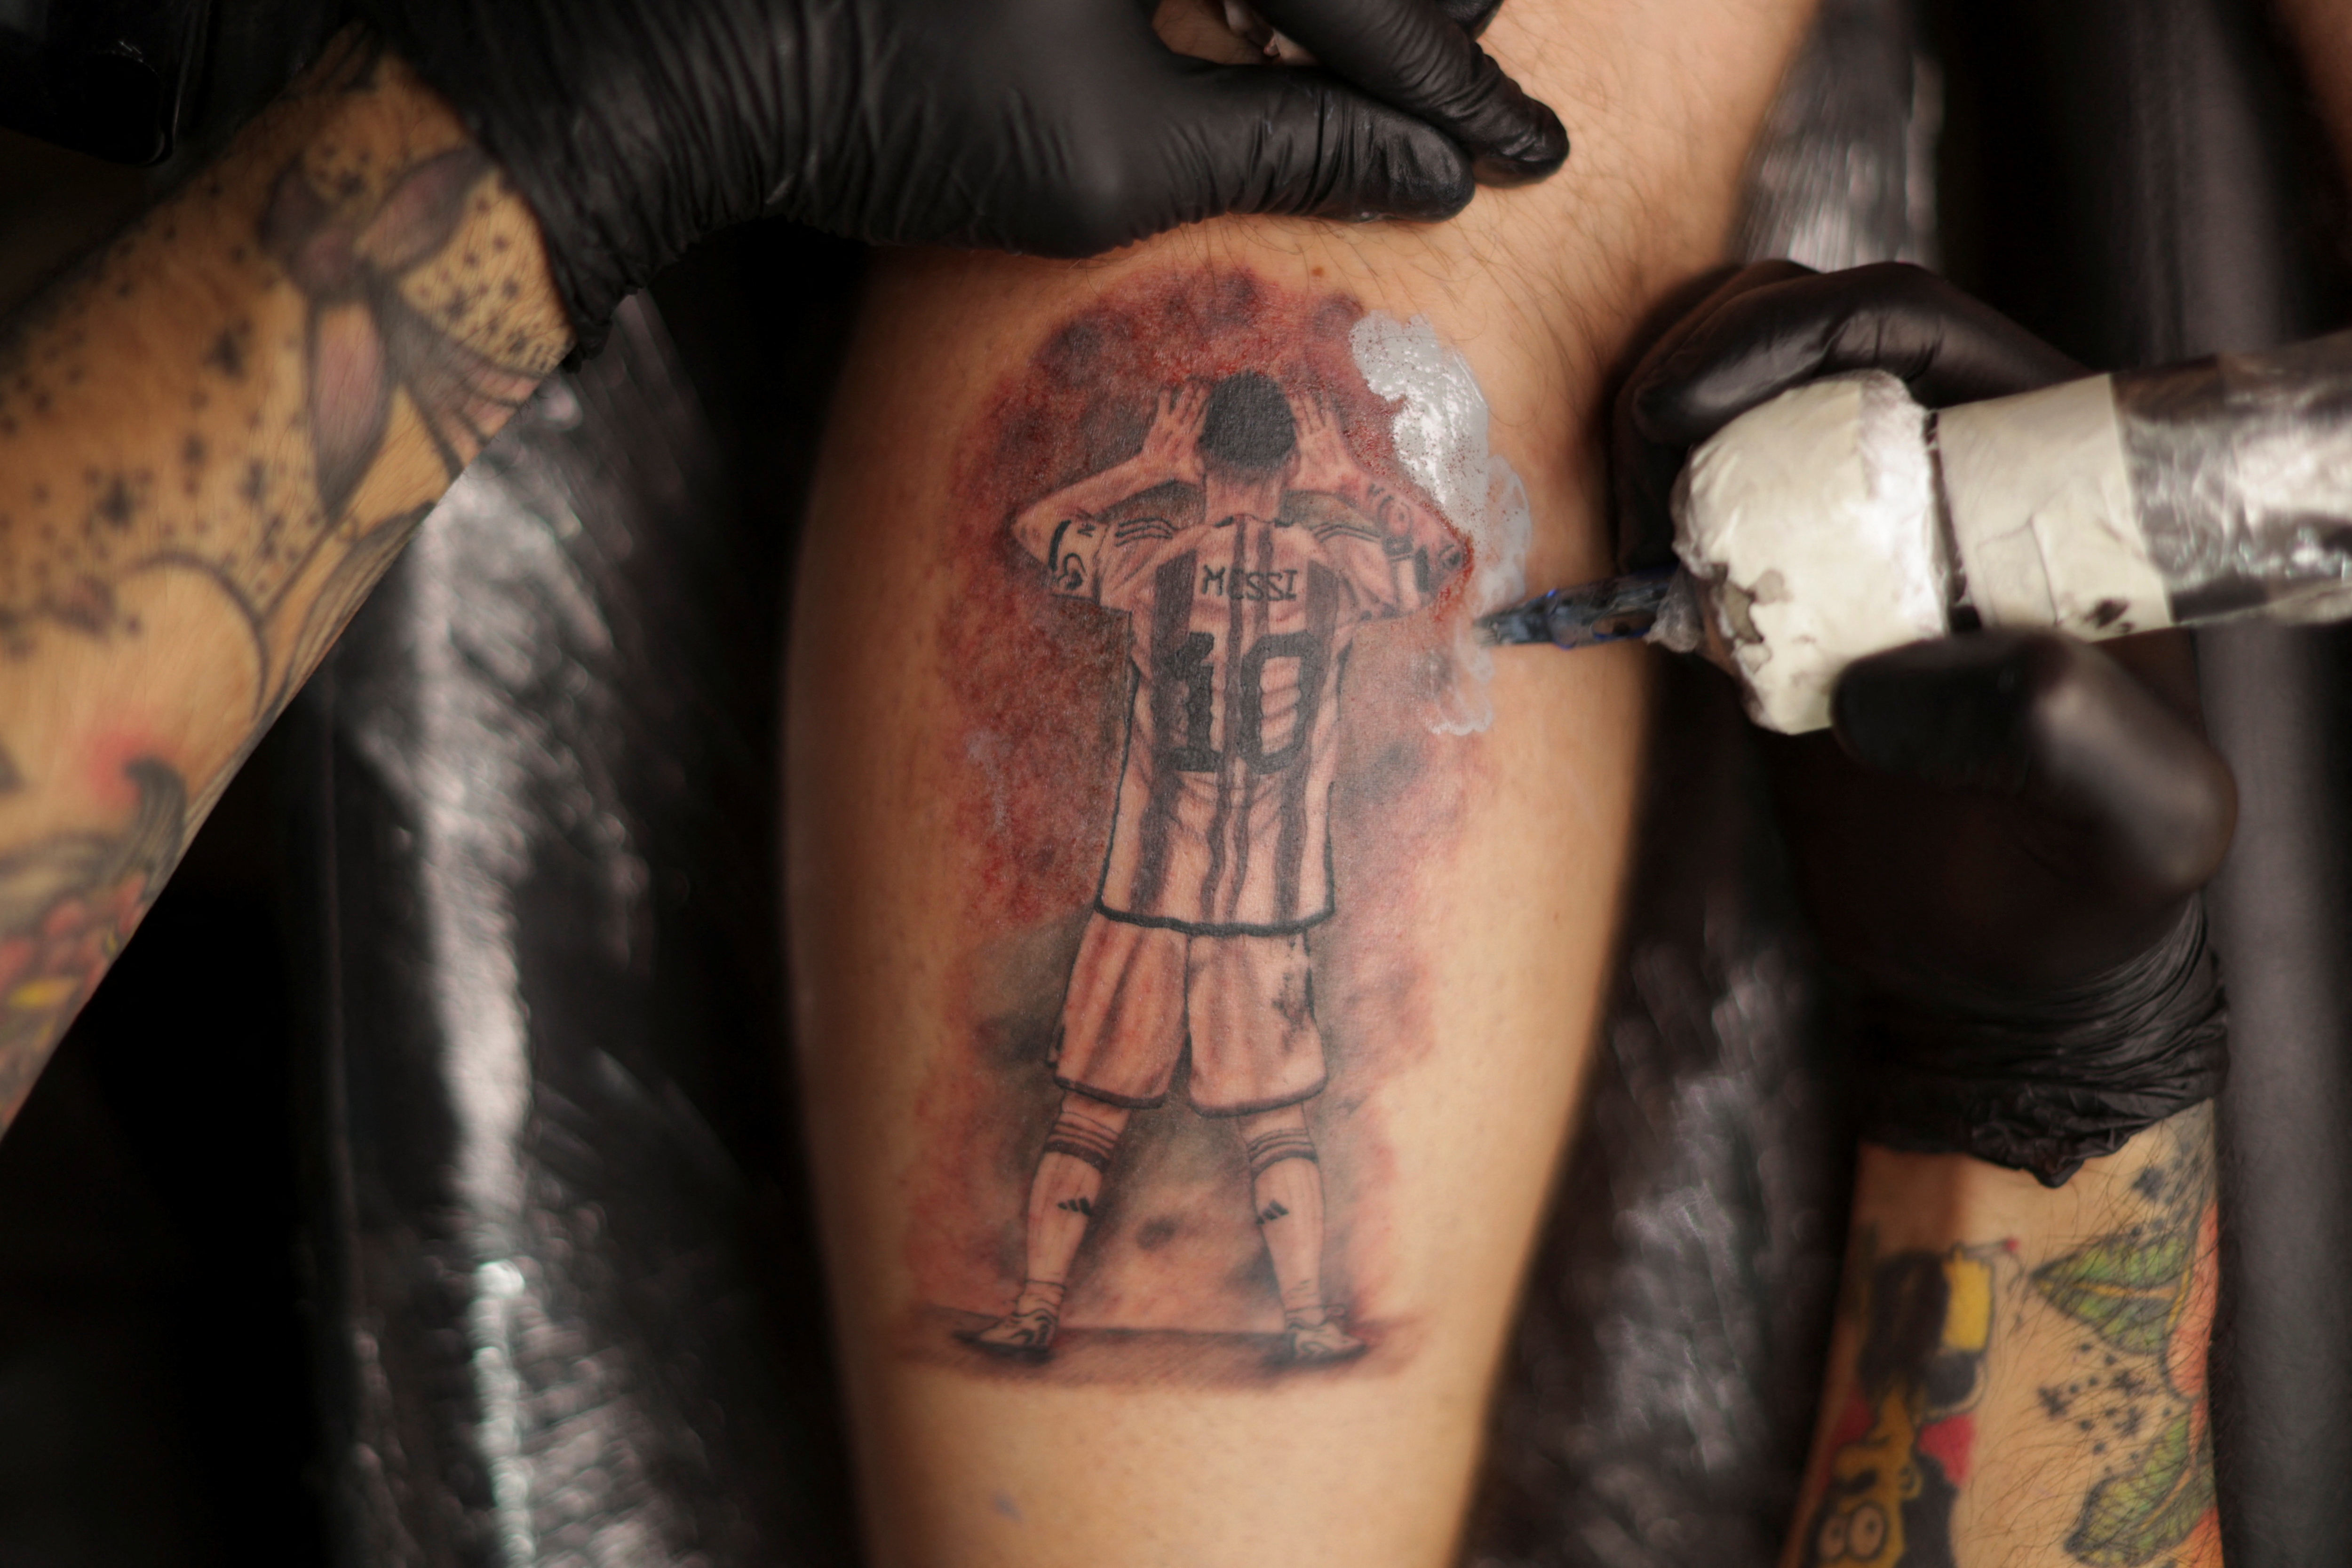 Argentine tattooists swamped by demand for Messi tributes  Reuters